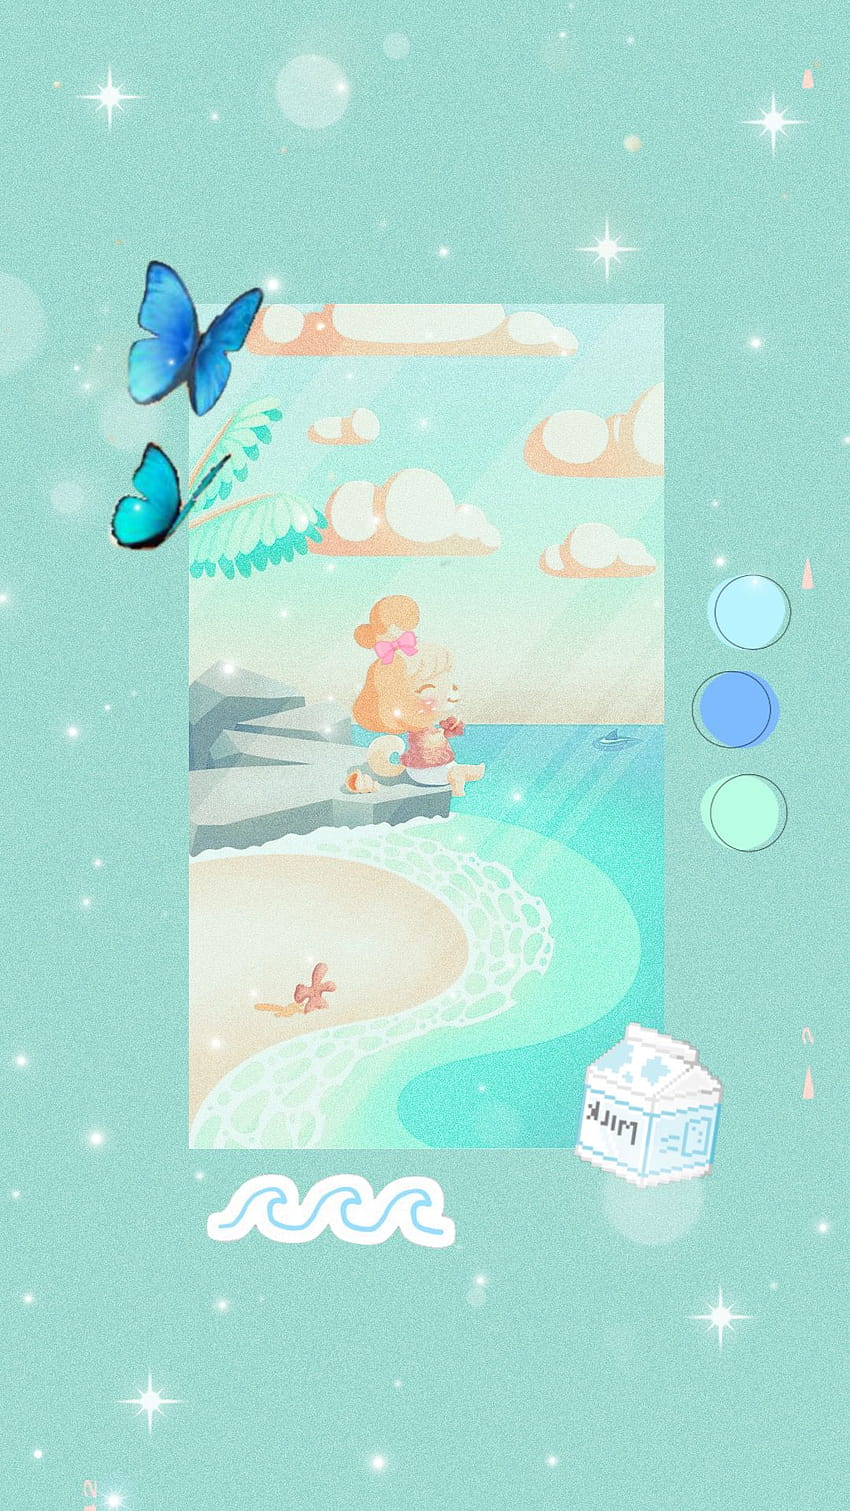 An illustration of a girl and a dog on a beach with a butterfly and a cup of tea - Animal Crossing